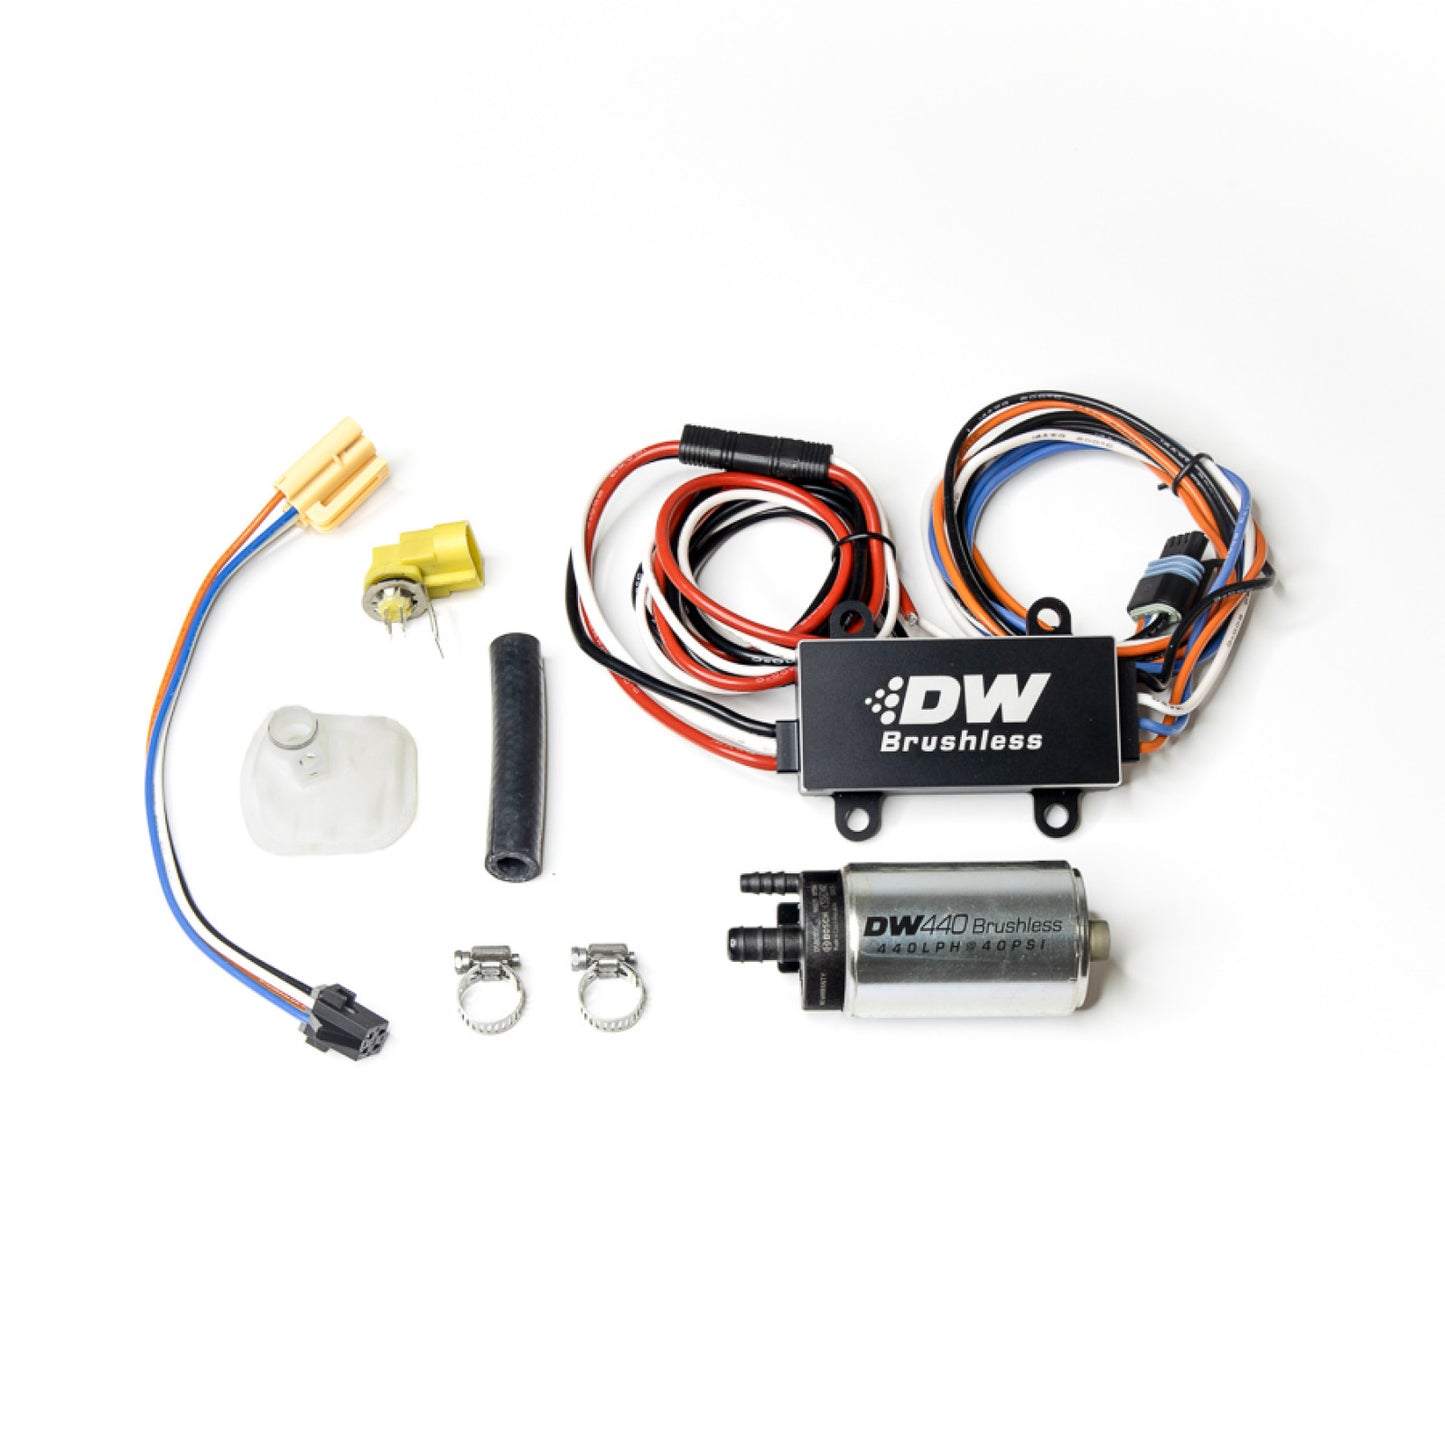 Deatschwerks 440lph In-Tank Brushless Fuel Pump with PWM Controller and 9-0905 Install Kit